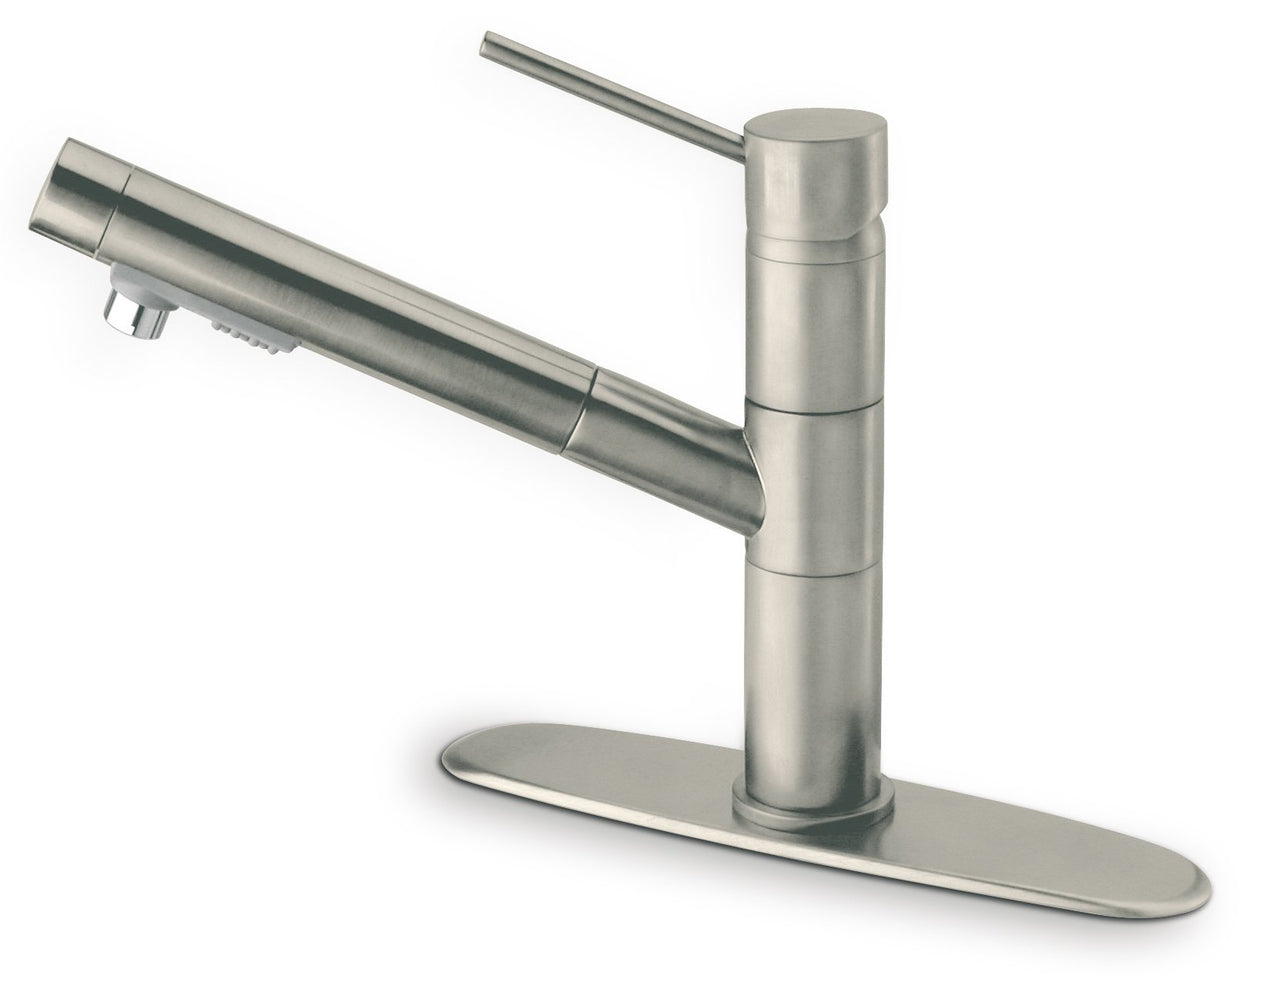 Latoscana Elba Single Handle Pull-Out Spray Kitchen Faucet In Brushed Nickel Kitchen Faucet Latoscana 